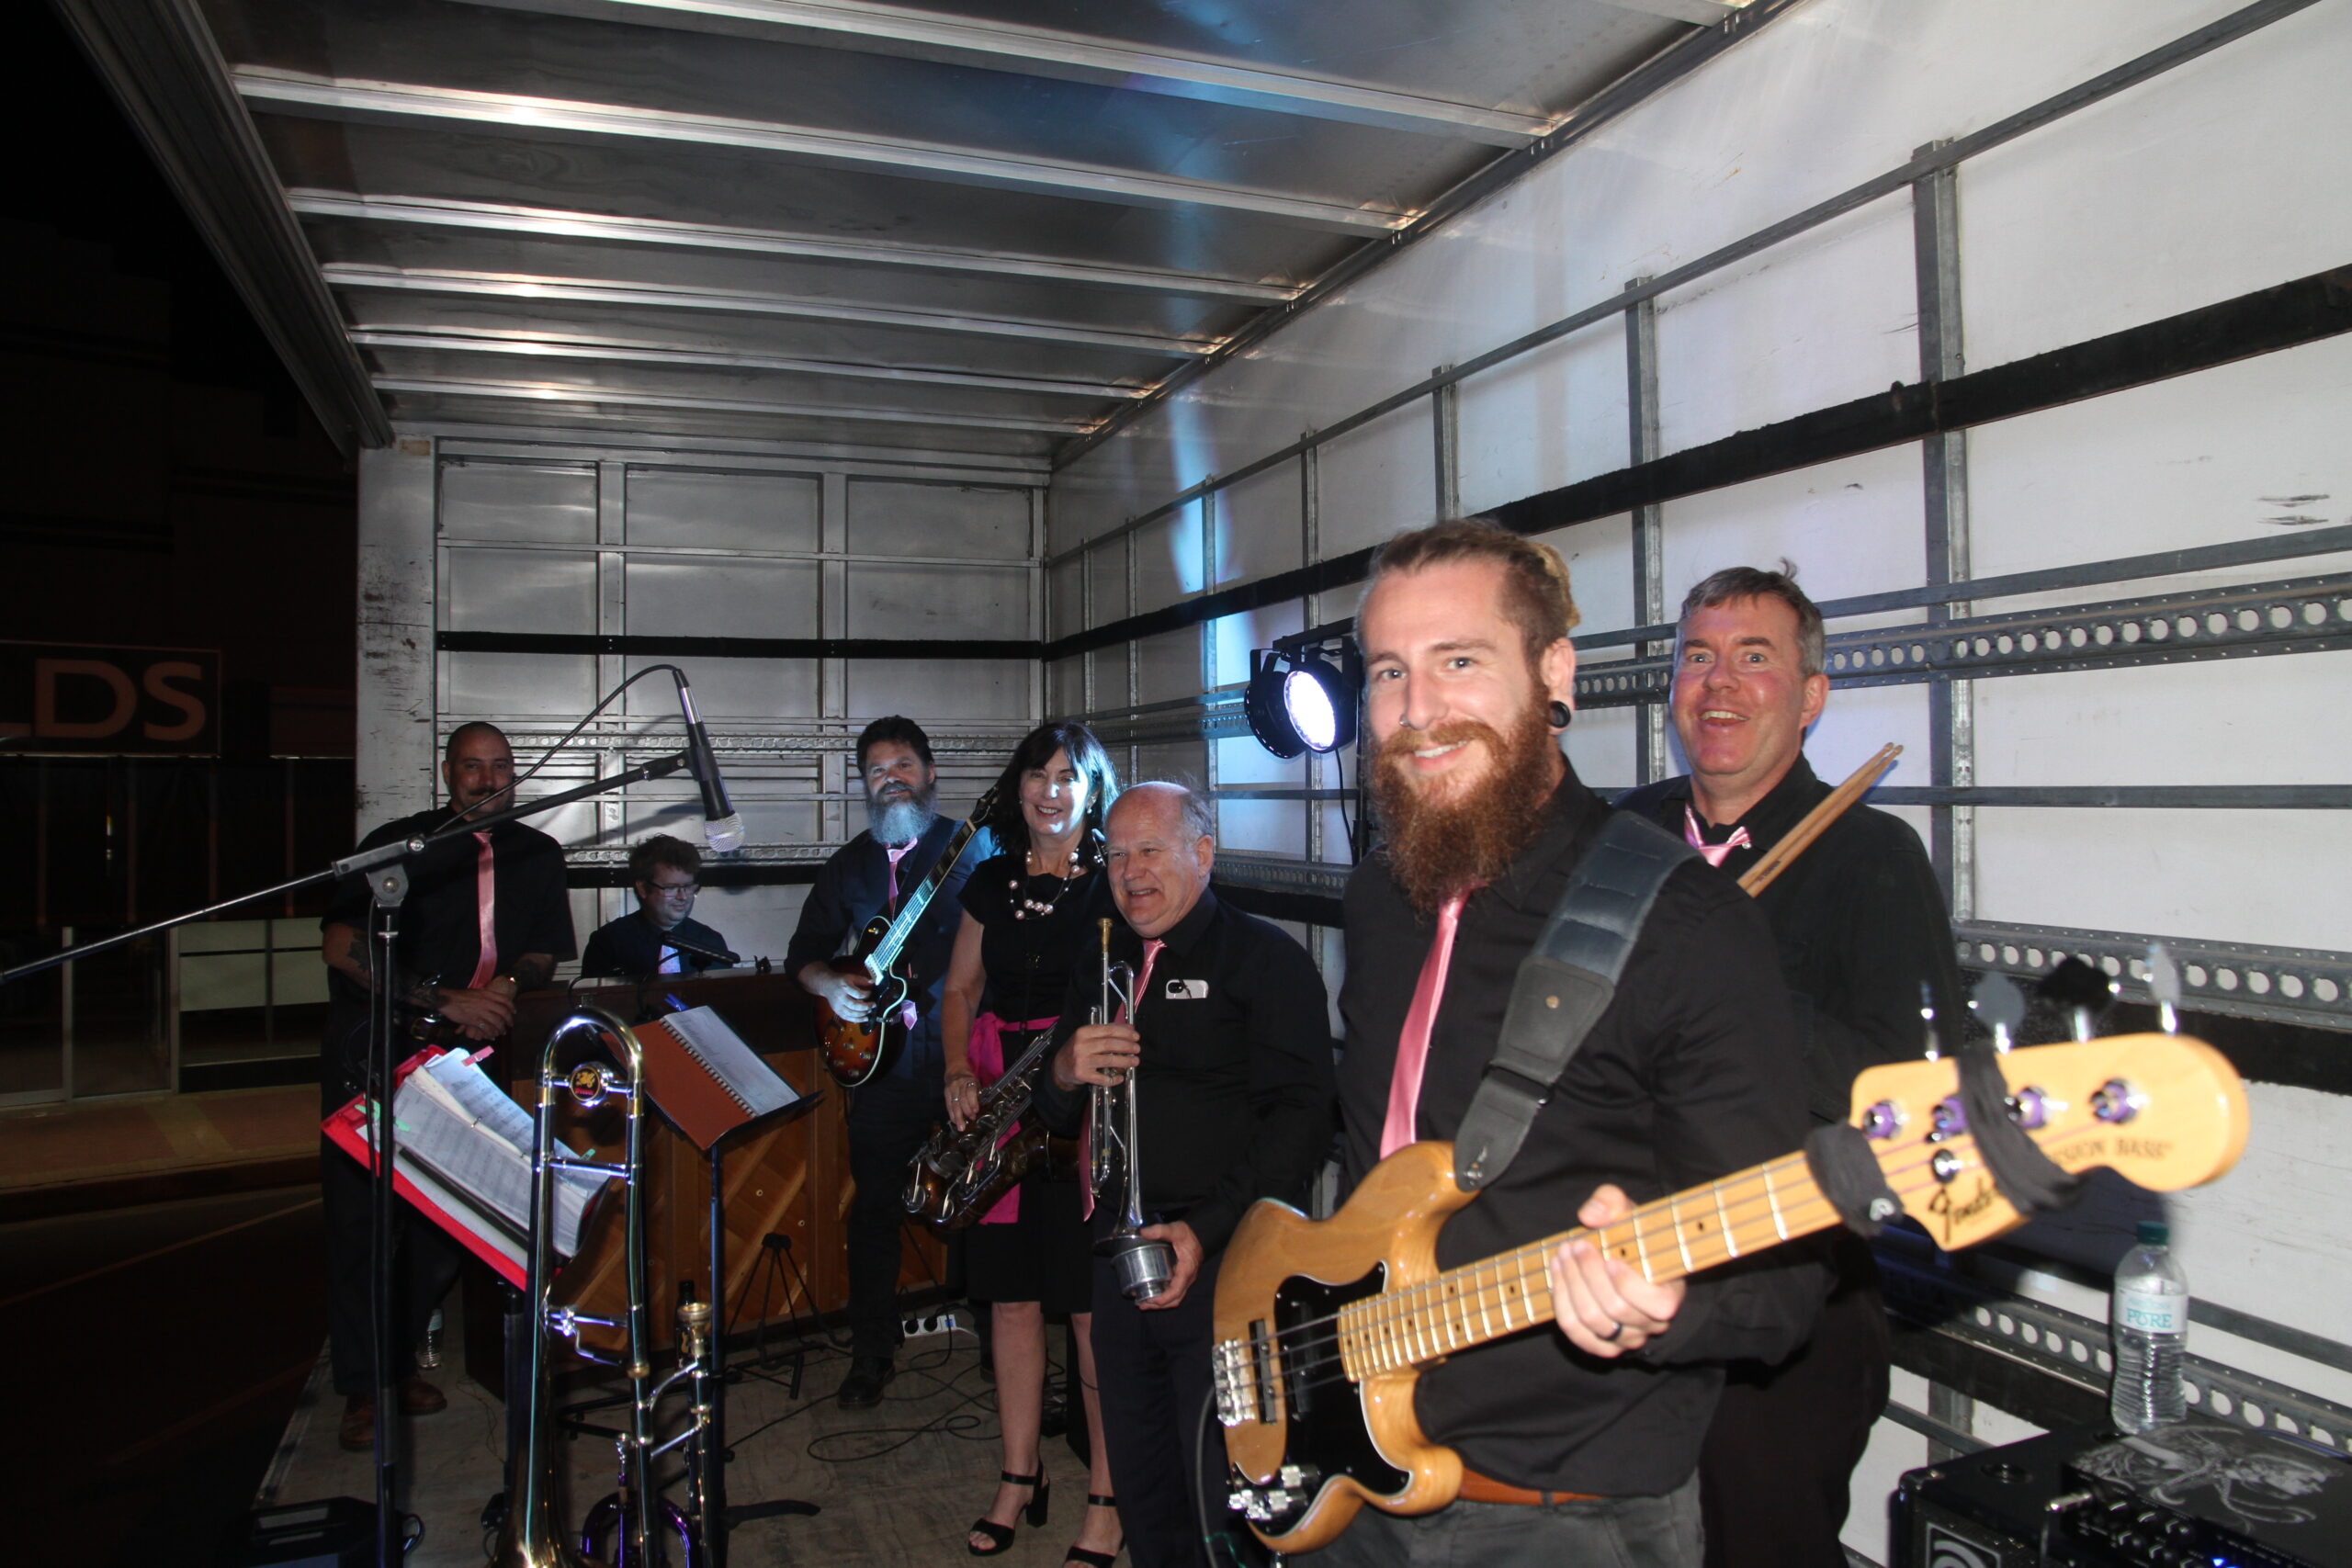 Jazz Junction provided the music for the Pink Up fundraiser on Saturday night. From left, Jack Campbell, Steve Bailey, Aaron Johnson, Rosemary Smith, Peter Carrett, James Vella and Rob Ritchie.